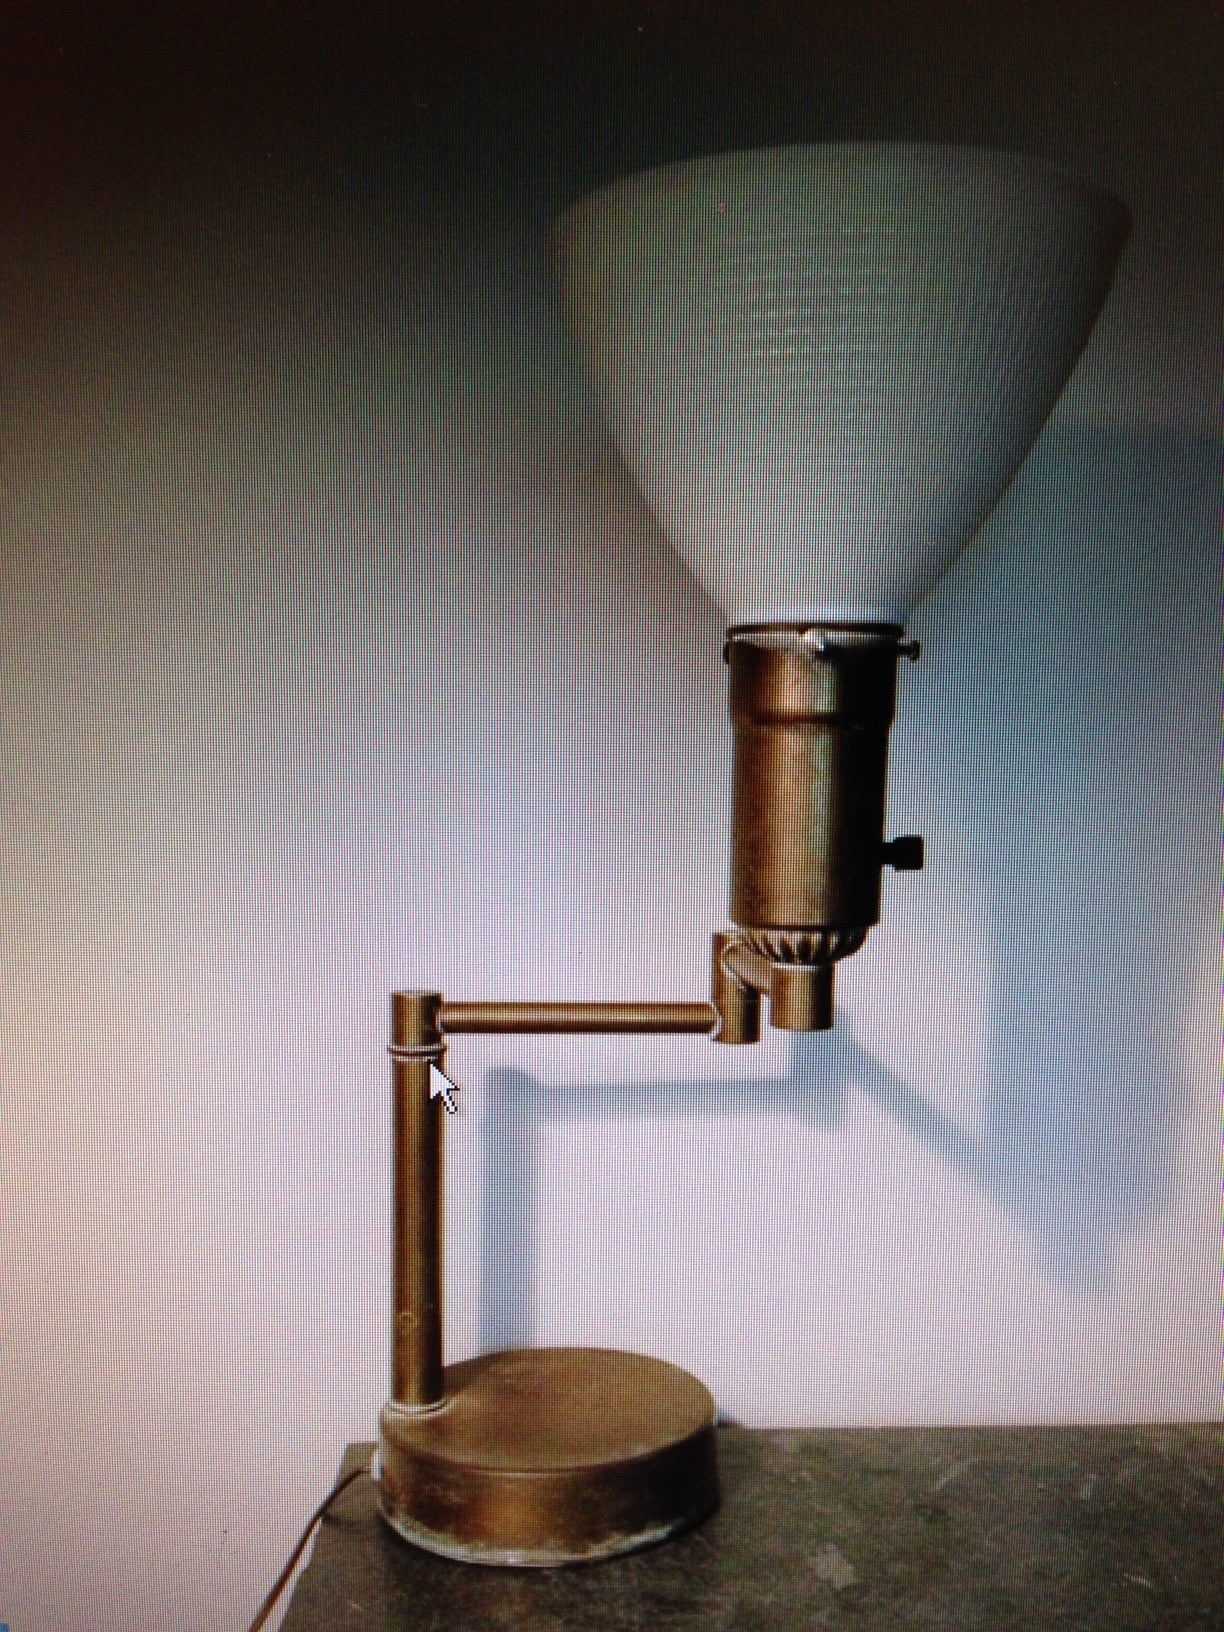 A Walter Von Nessen Swing-Arm Table Lamp in Brass. American, 1950s For Sale